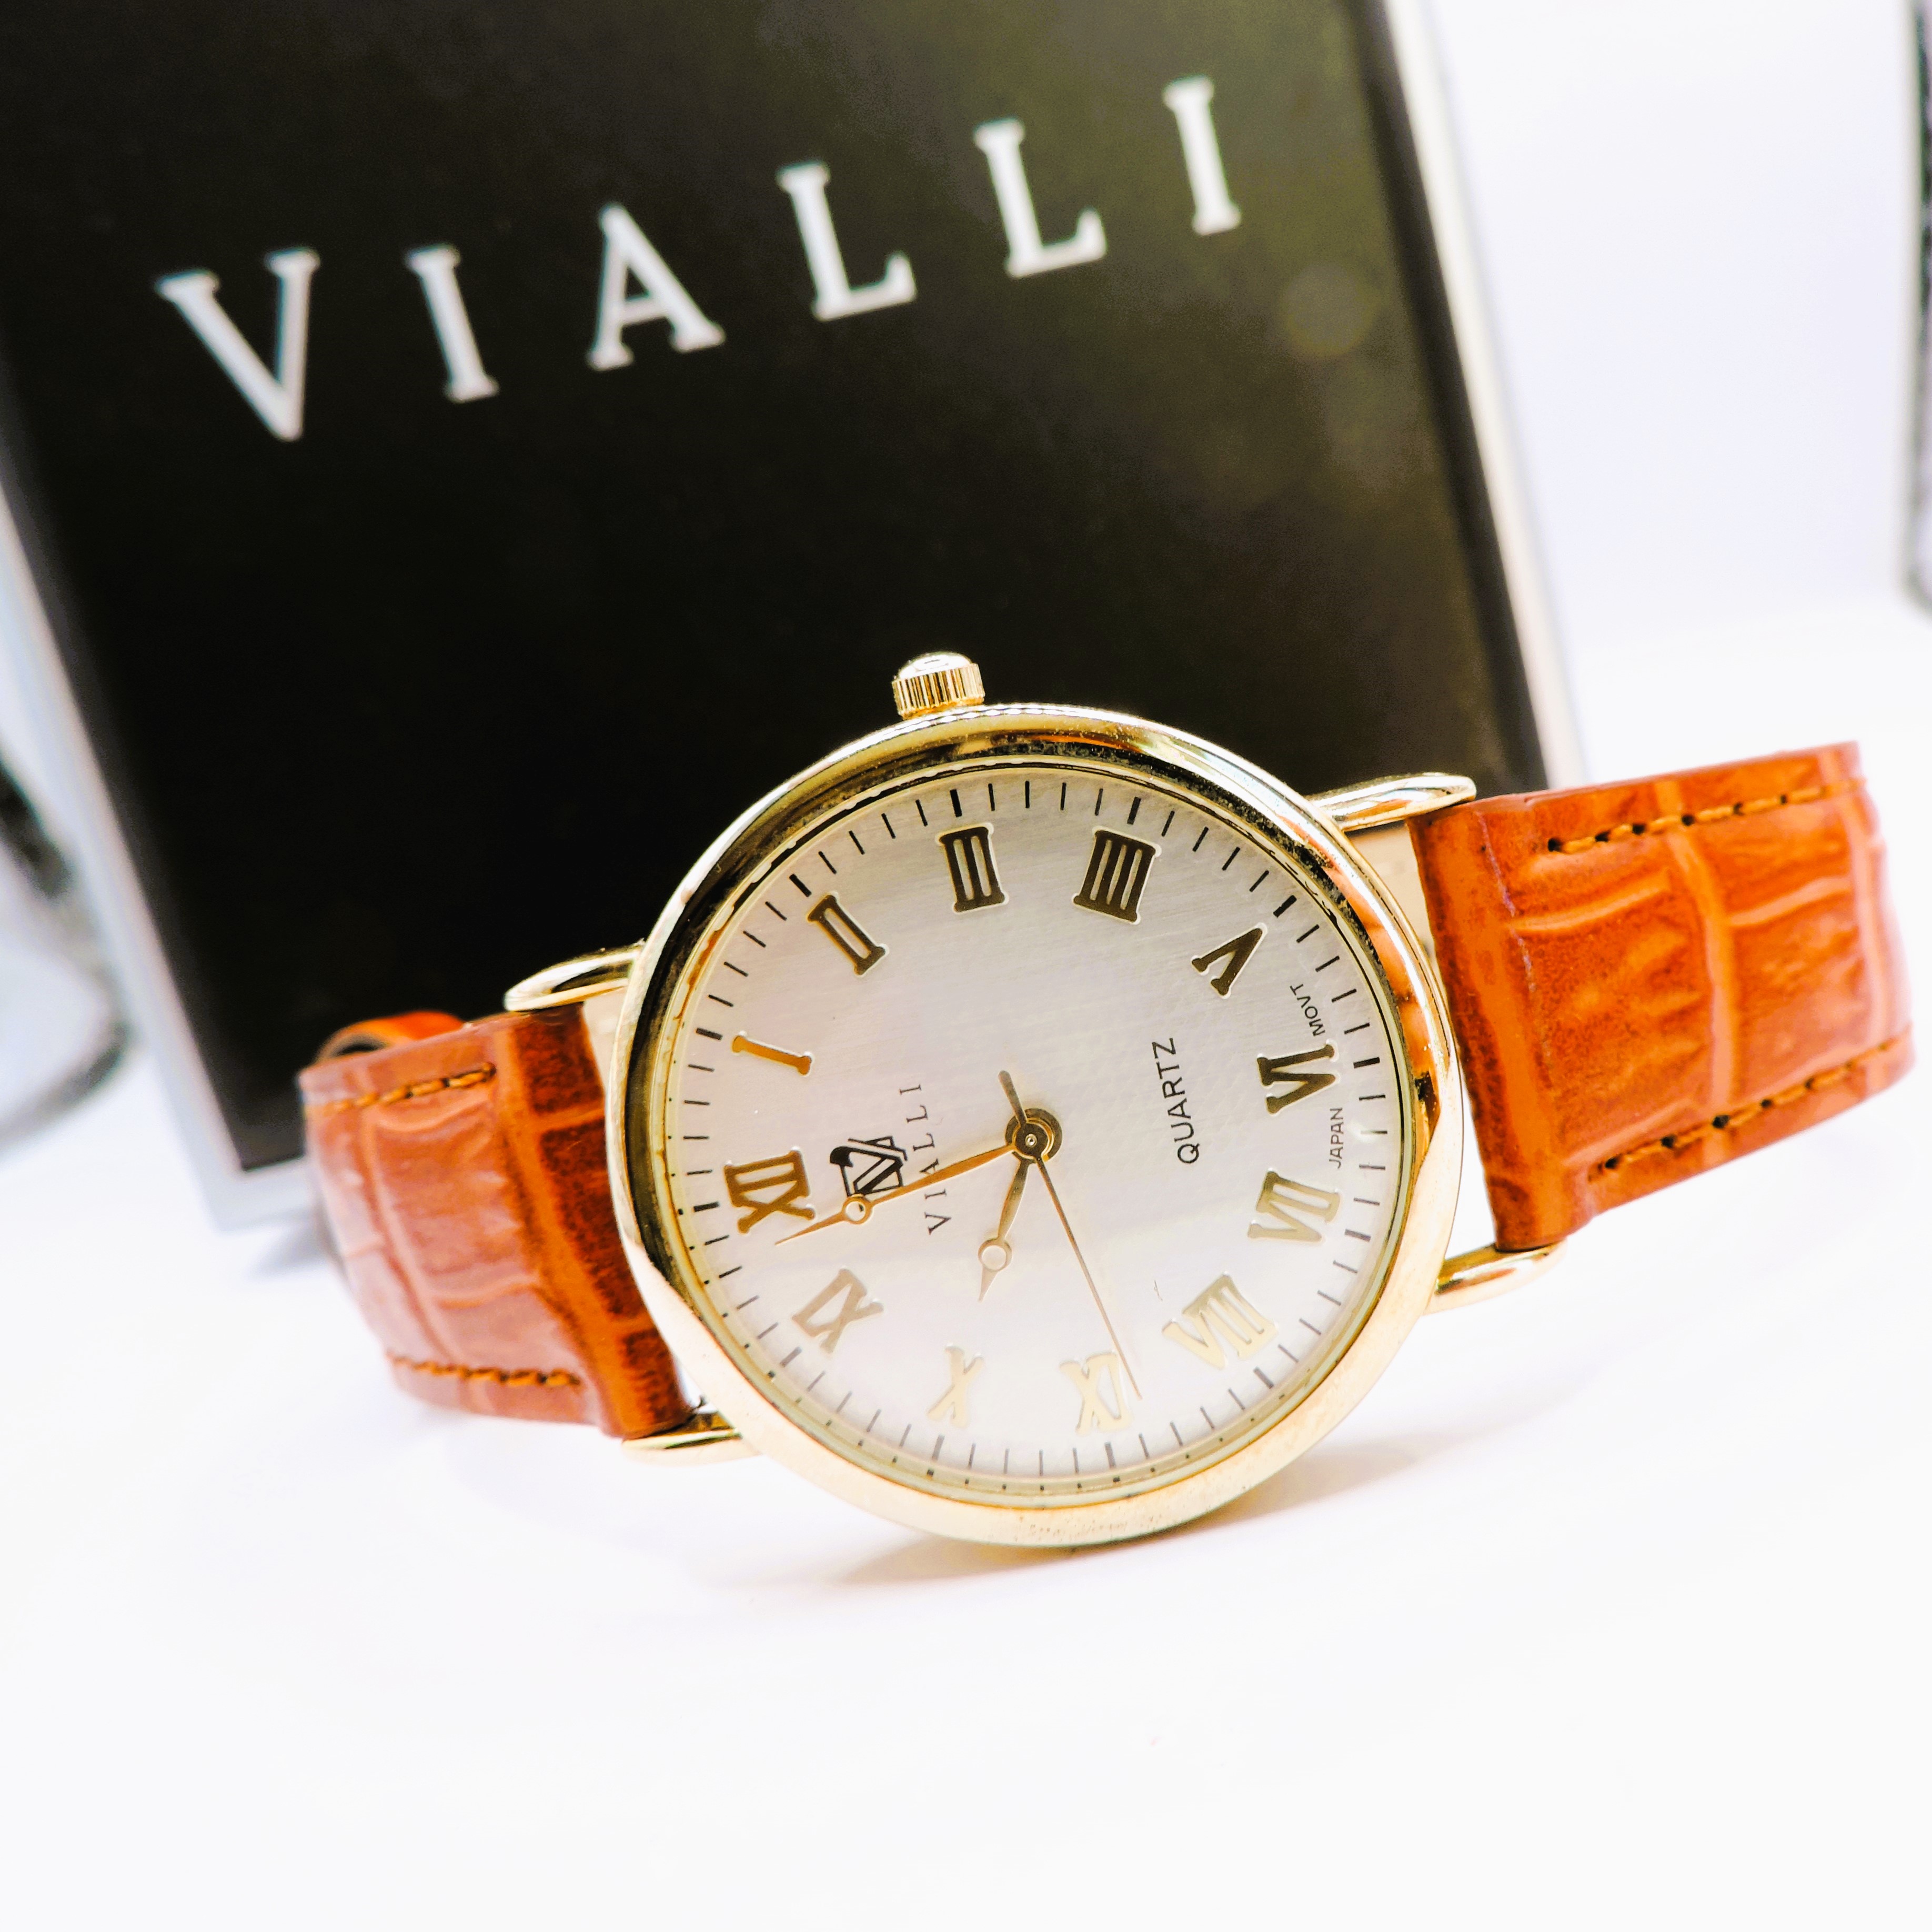 Vialli Quartz Watch Gold Plated With Leather Strap in Original Box